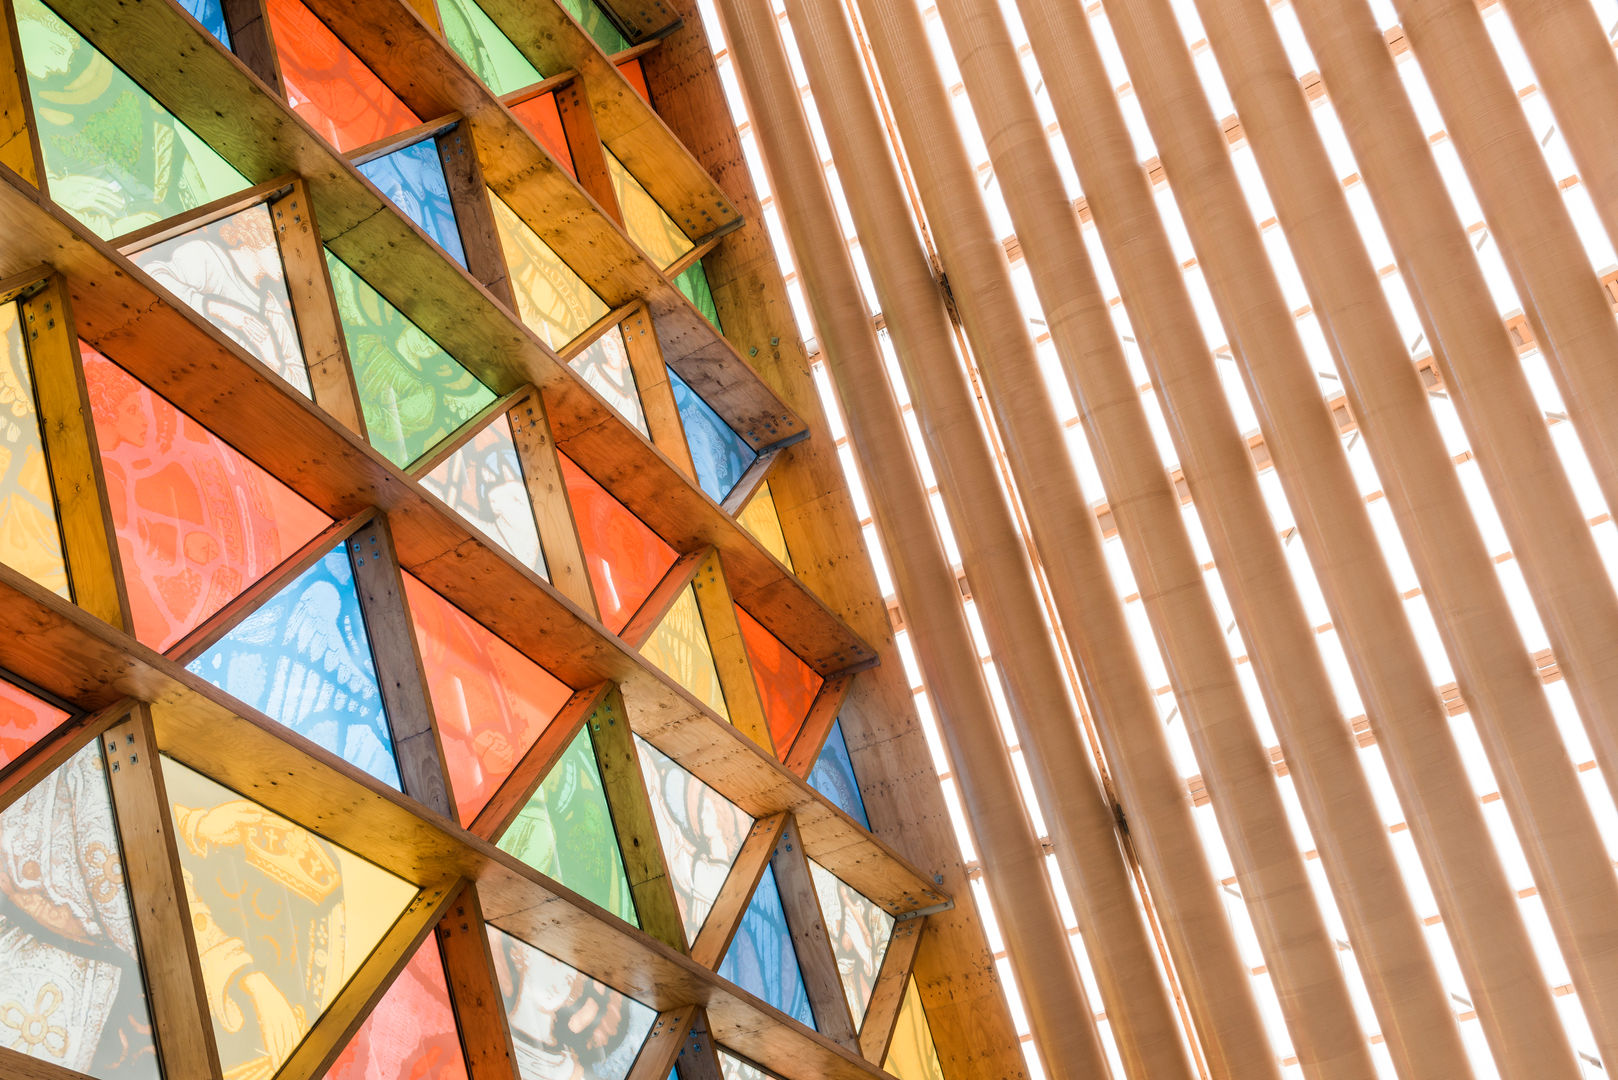 ​Cardboard Cathedral, 坂茂建築設計 (Shigeru Ban Architects) 坂茂建築設計 (Shigeru Ban Architects)